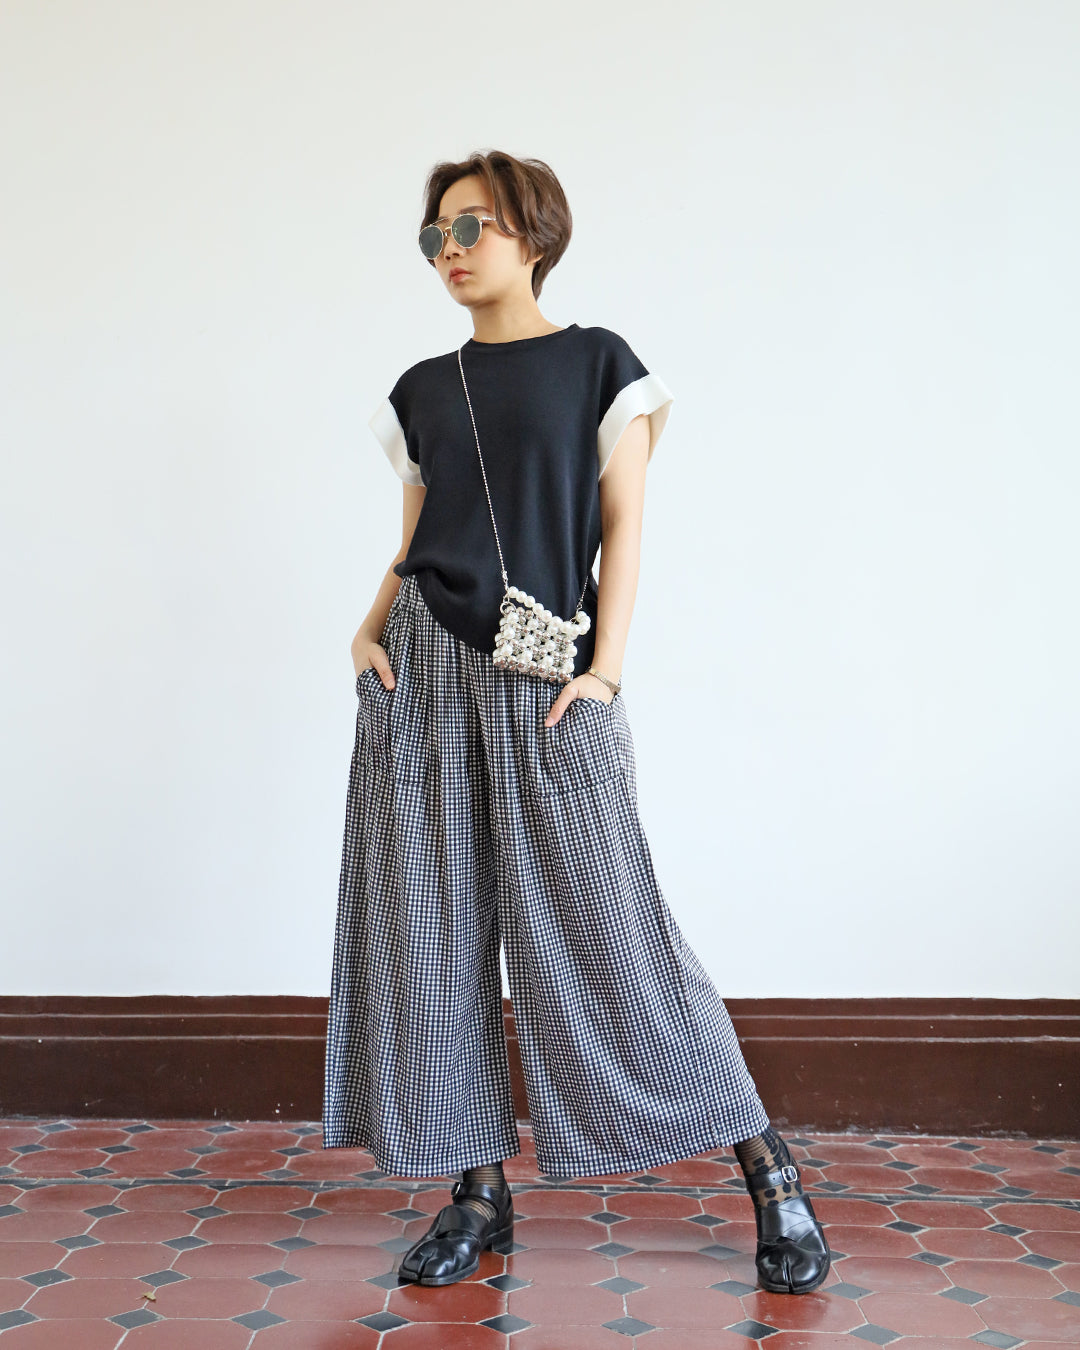 2-Tone Summer Knit Top